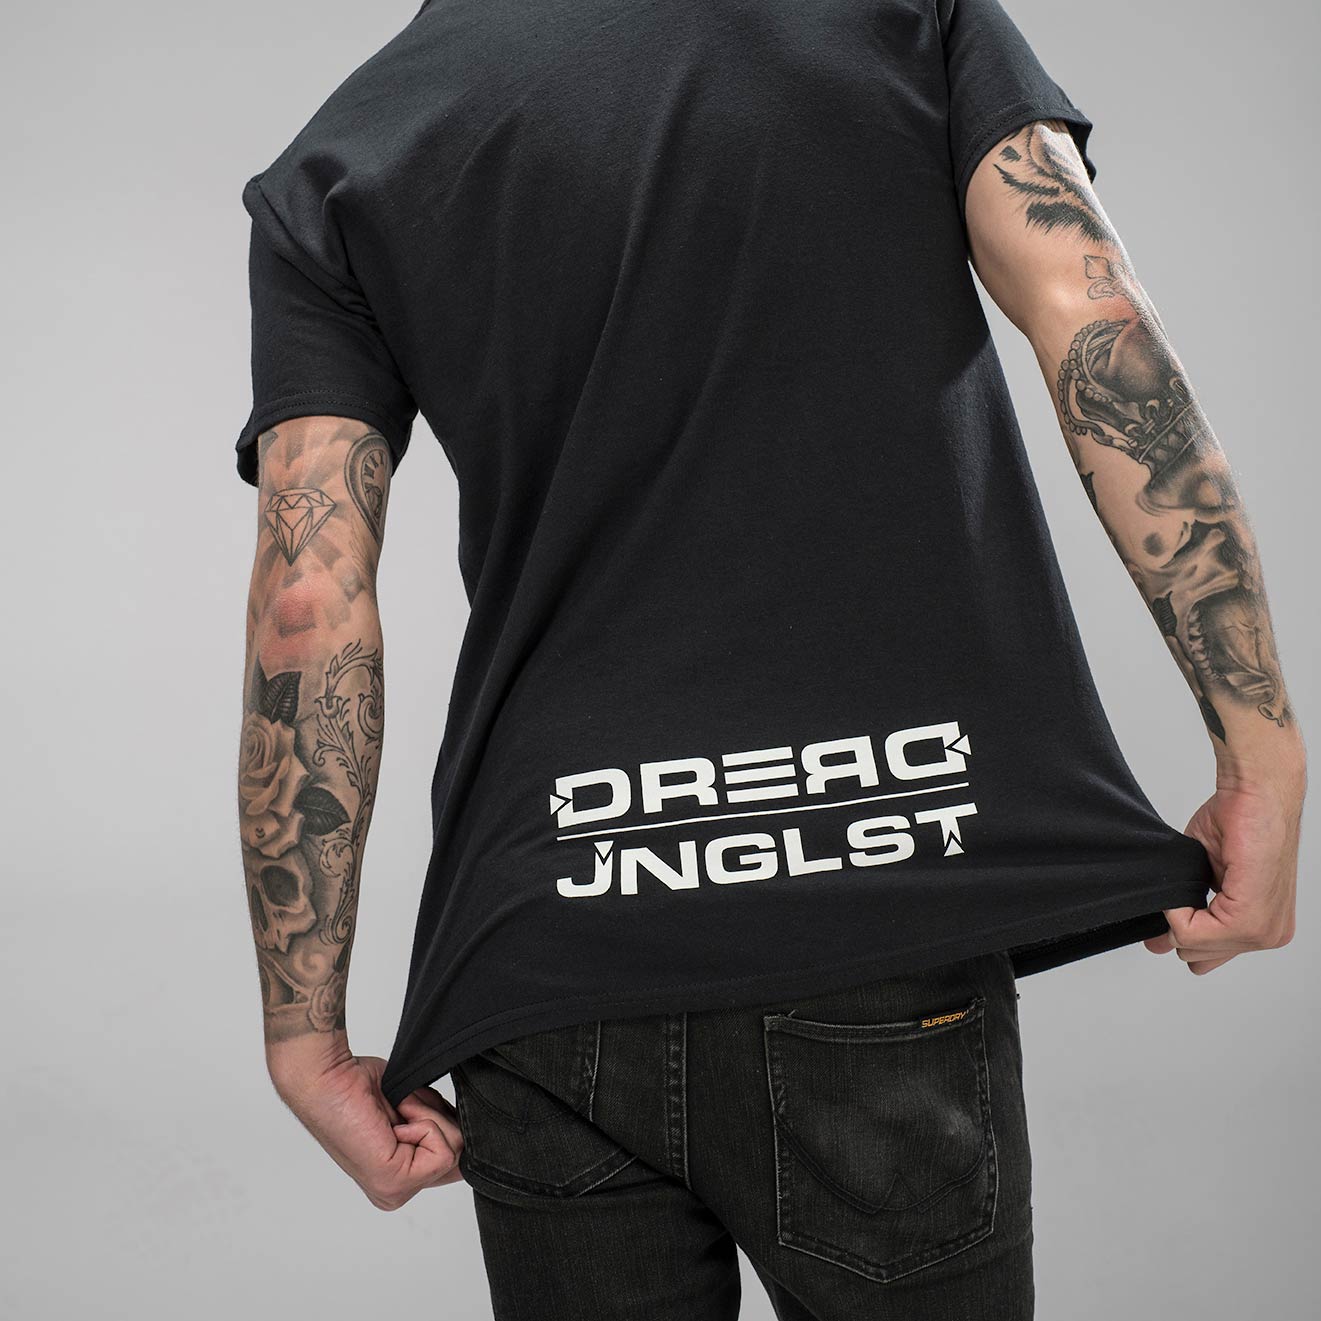 Dread Records Junglist Log on the back of our Tee